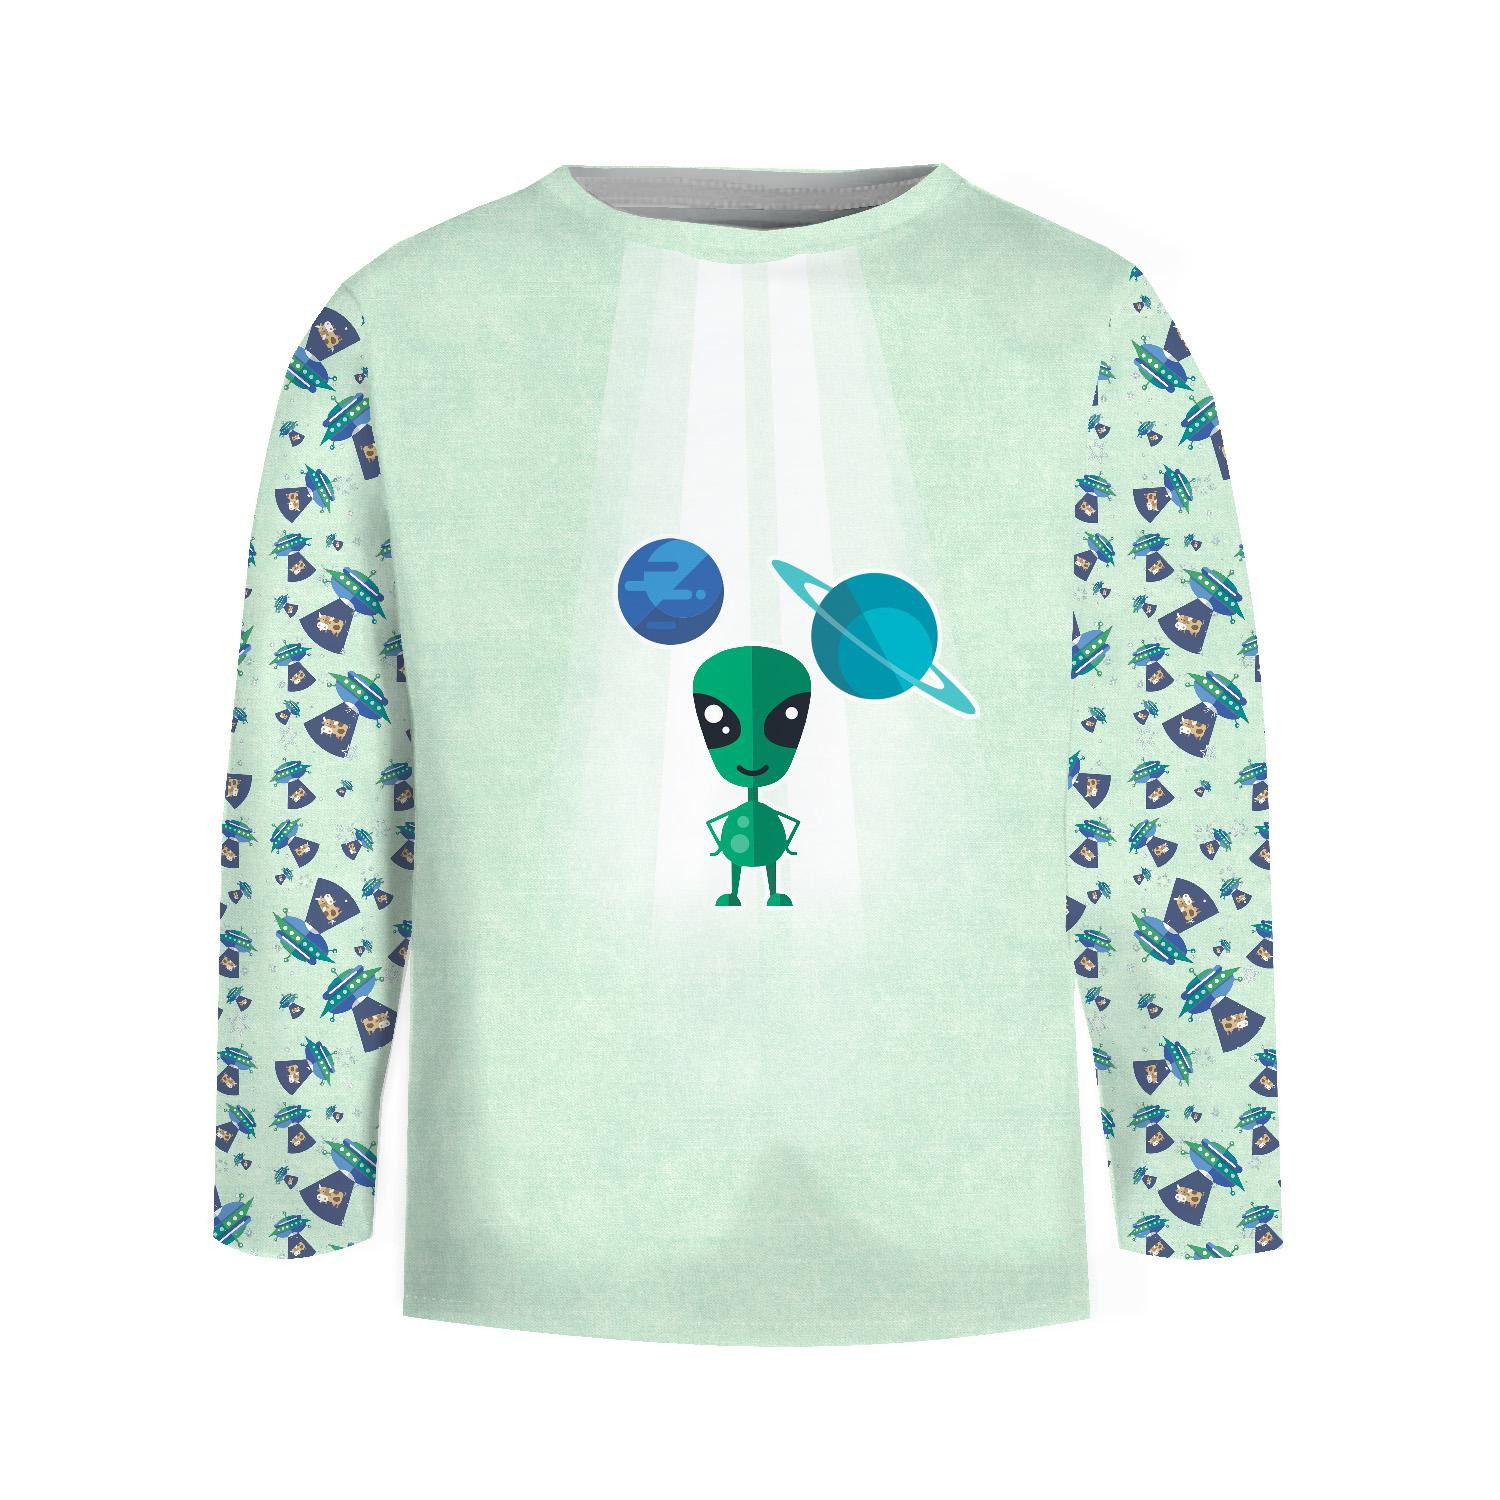 Longsleeve - ALIEN (SPACE EXPEDITION) / ACID WASH MINT - sewing set